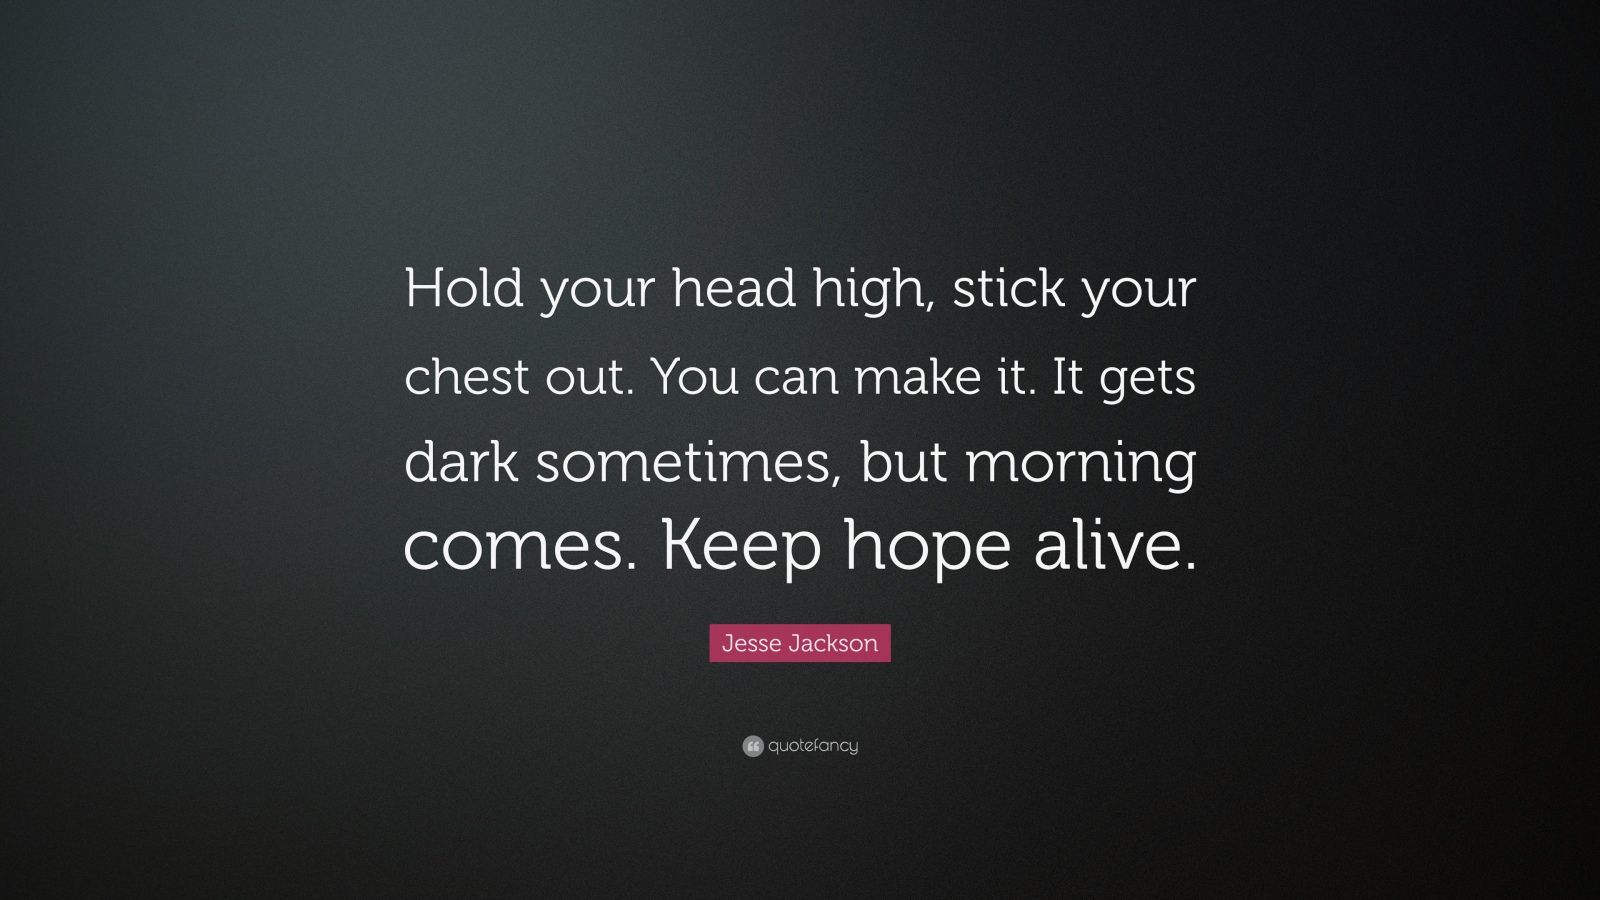 keep your head up quotes